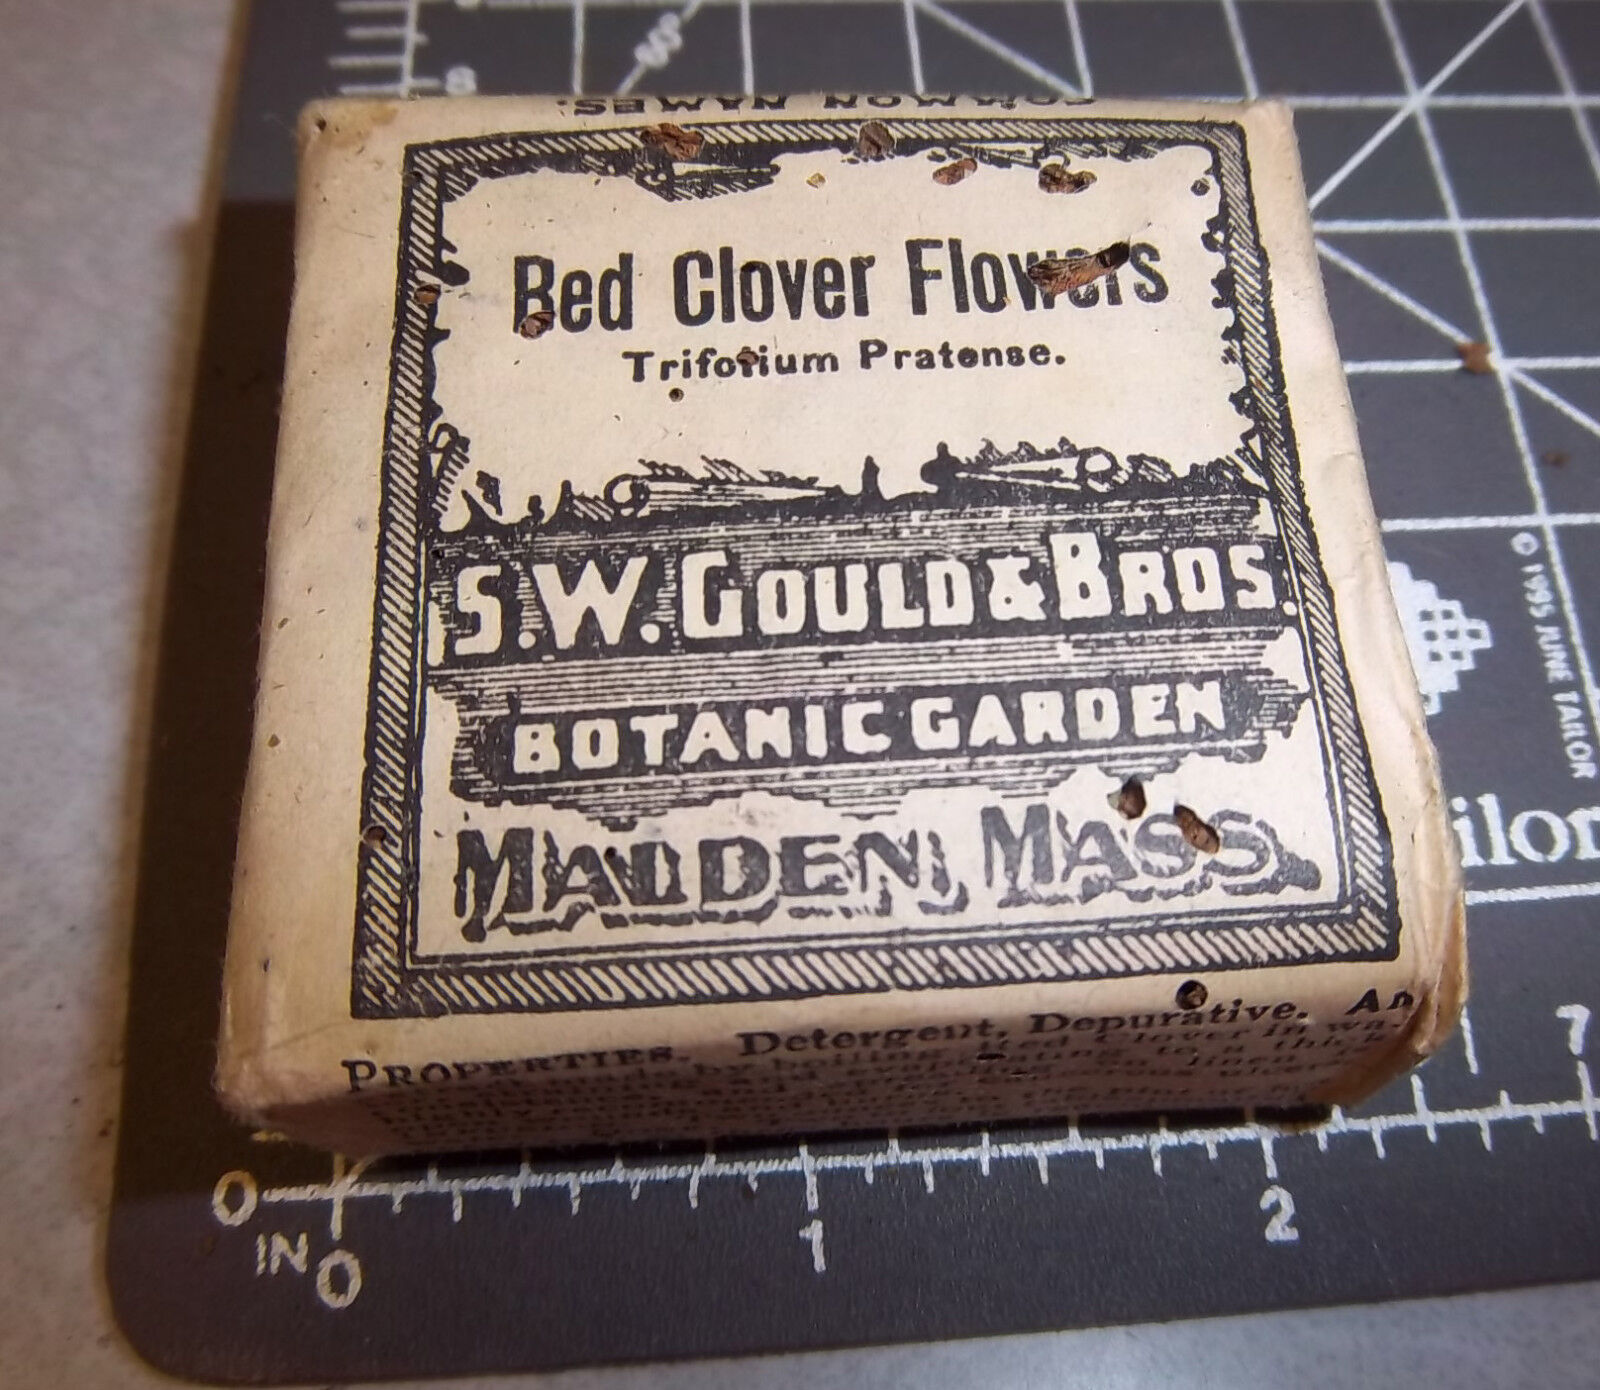 Vintage Sw Gould & Bros Bed Clover Flowers, 1900s Pharmacy New Box, Malden Mass.